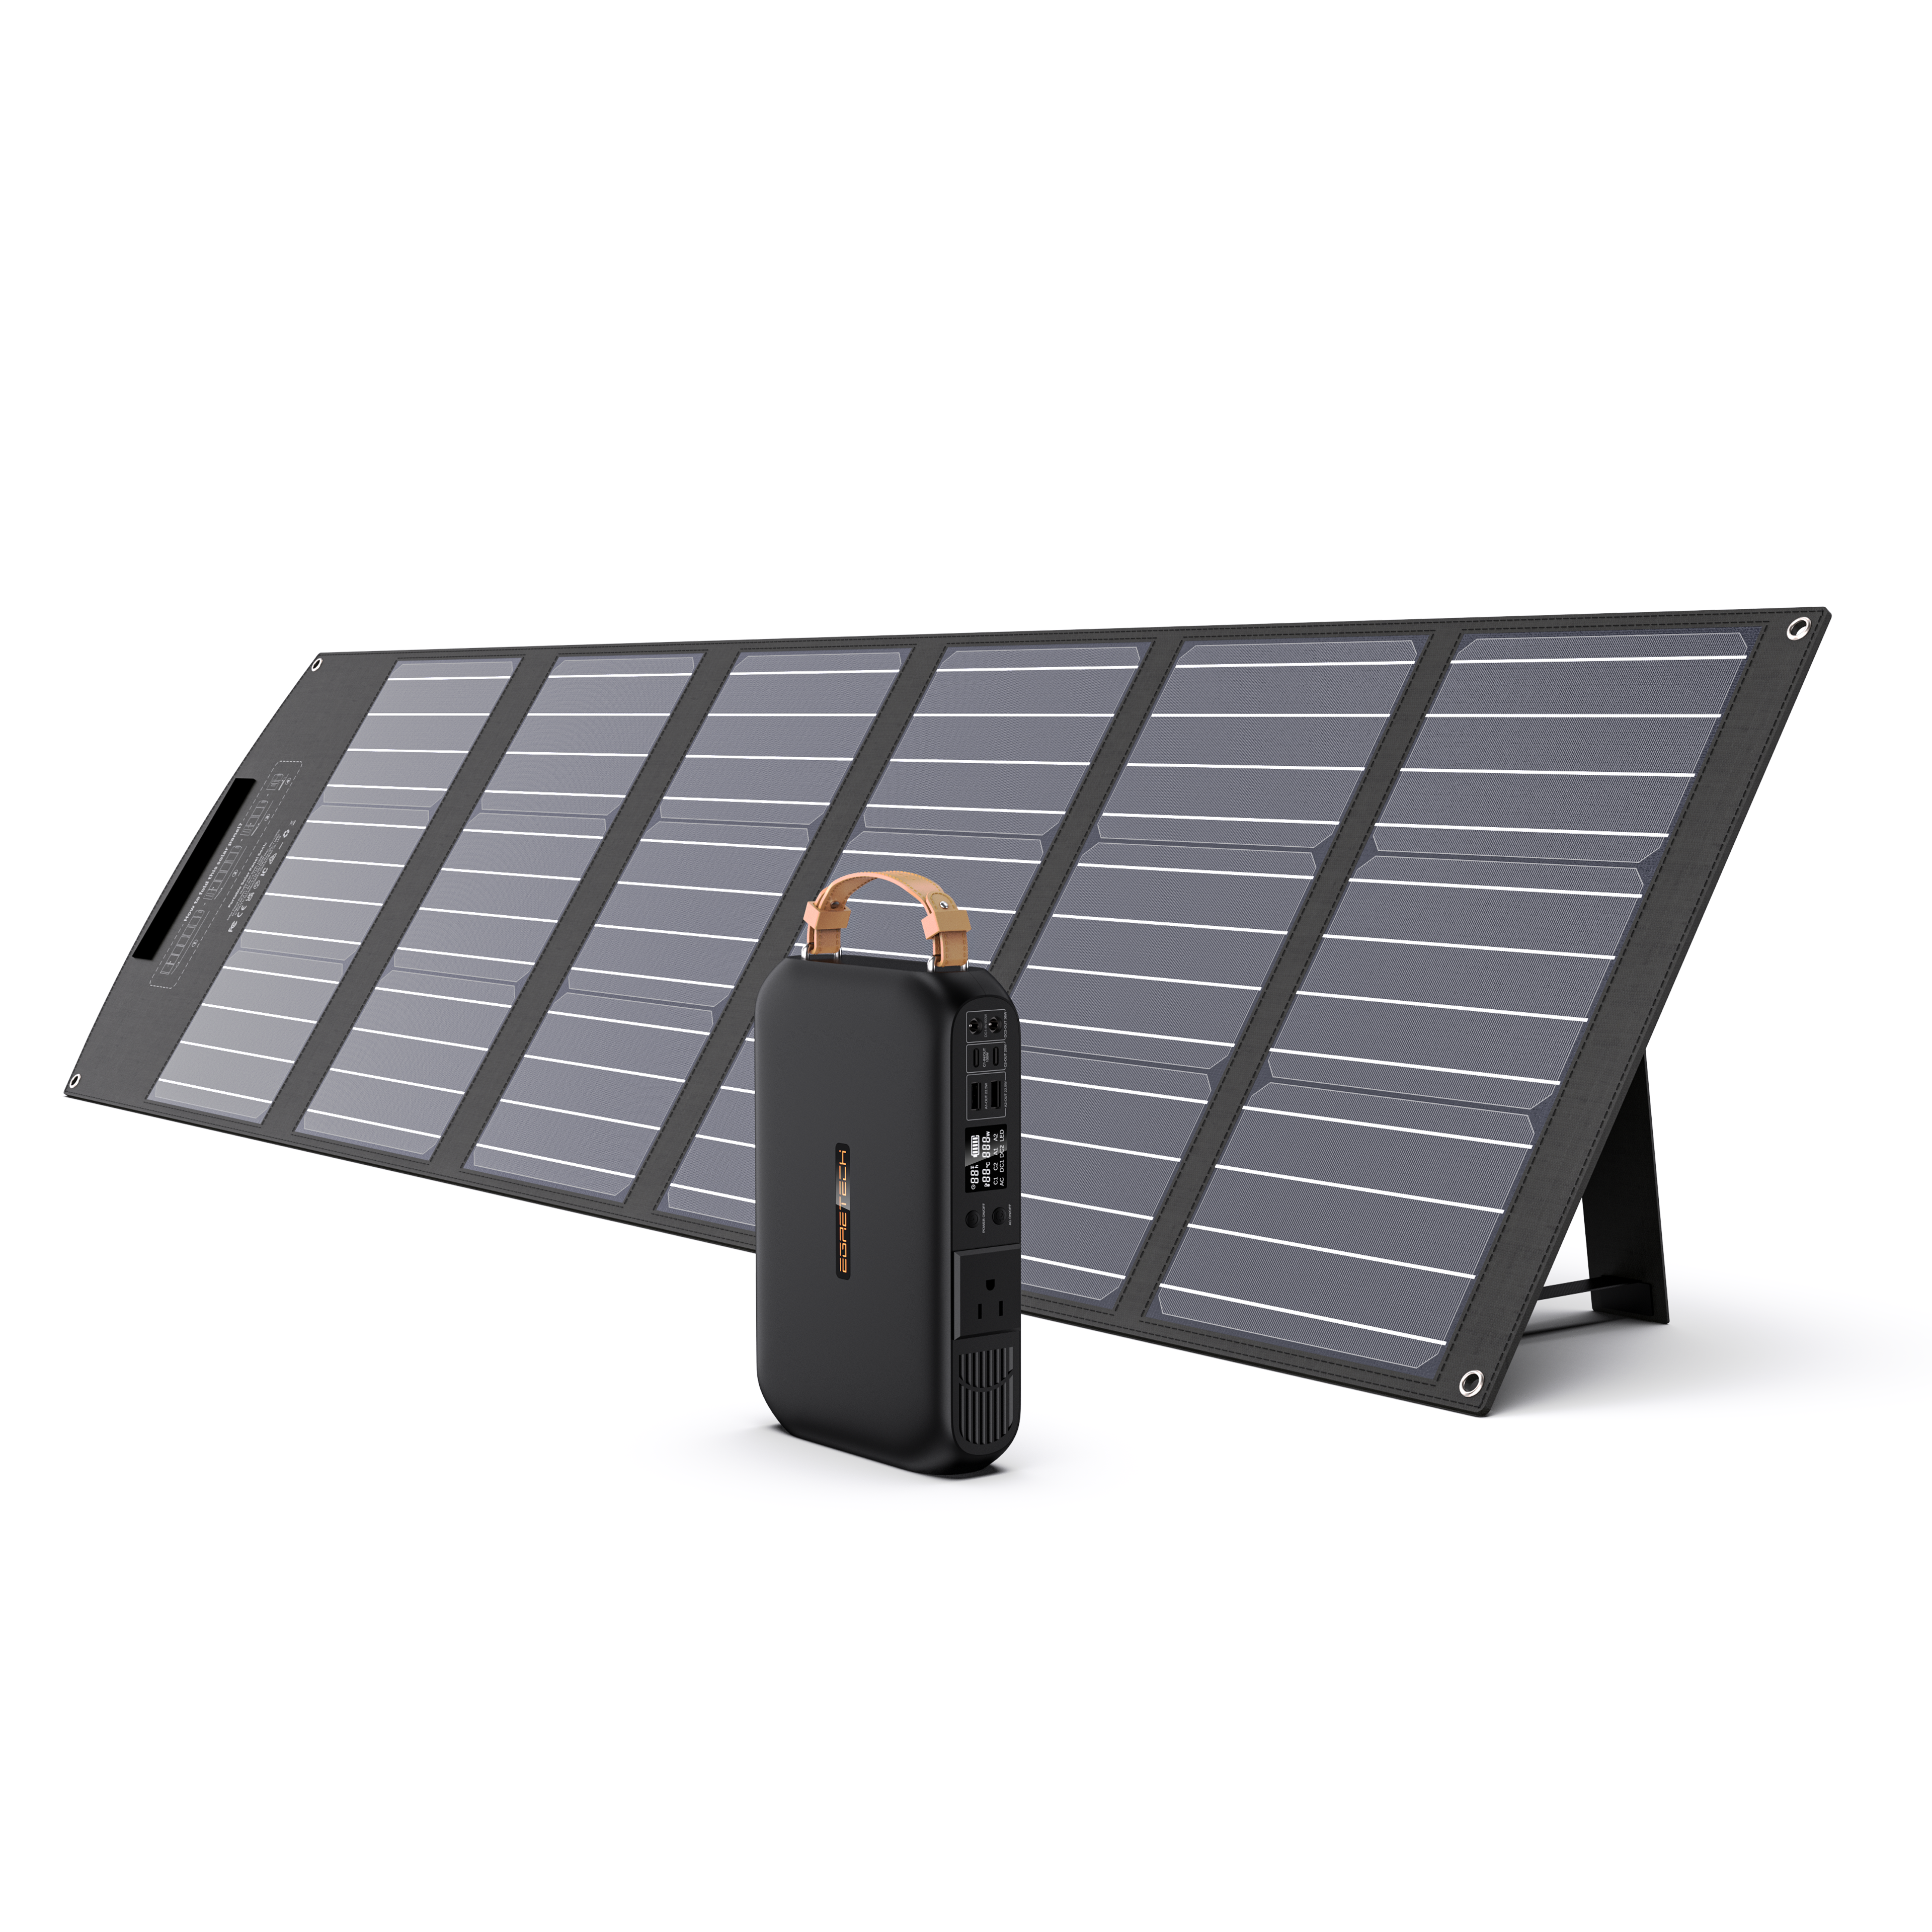 EGRETECH 300w Portable Power Station with Foldable Solar Panel